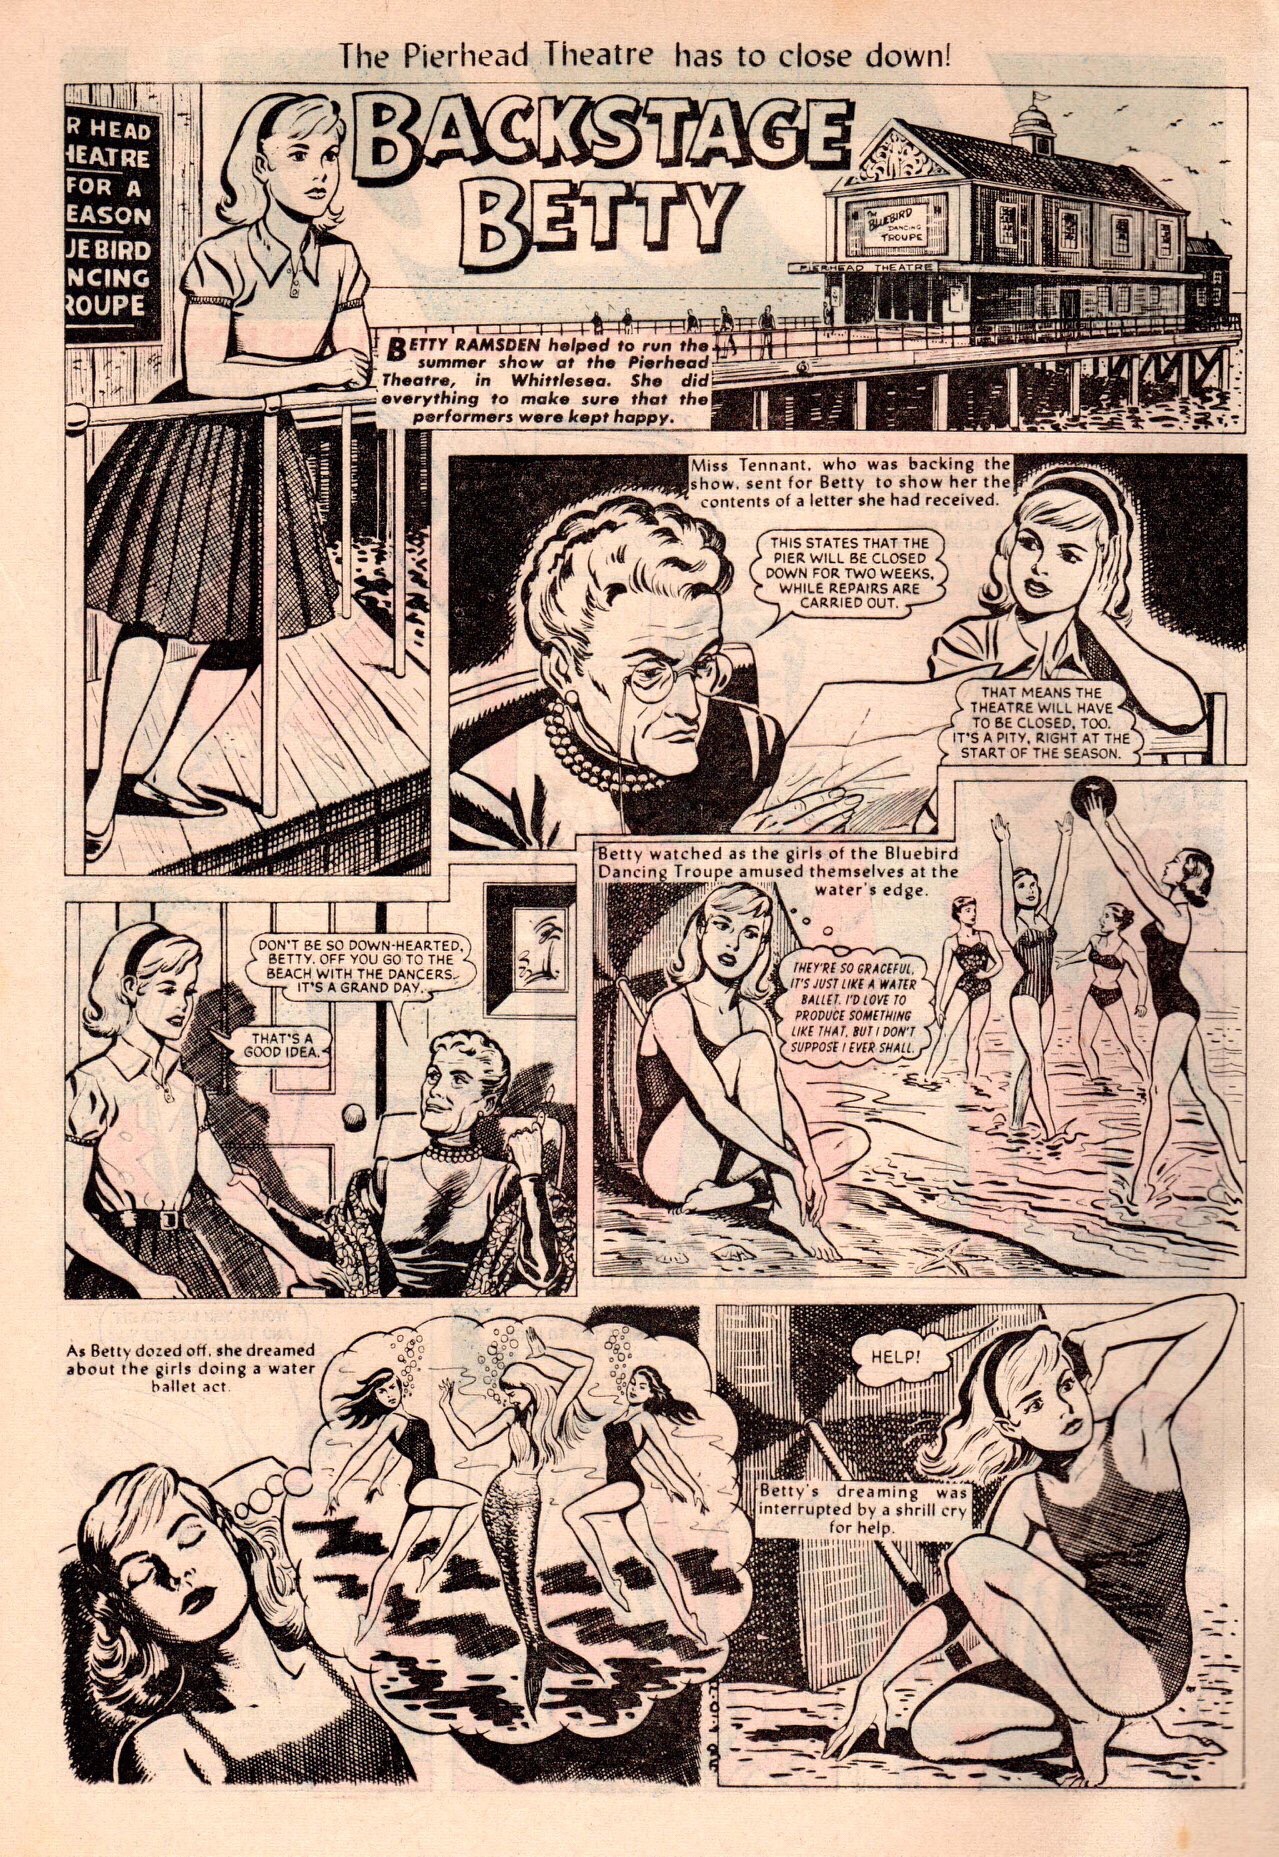 A page from the Judy story "Backstage Betty", artist unknown. Names such as Peter Kay and Neville Wilson have been discounted.